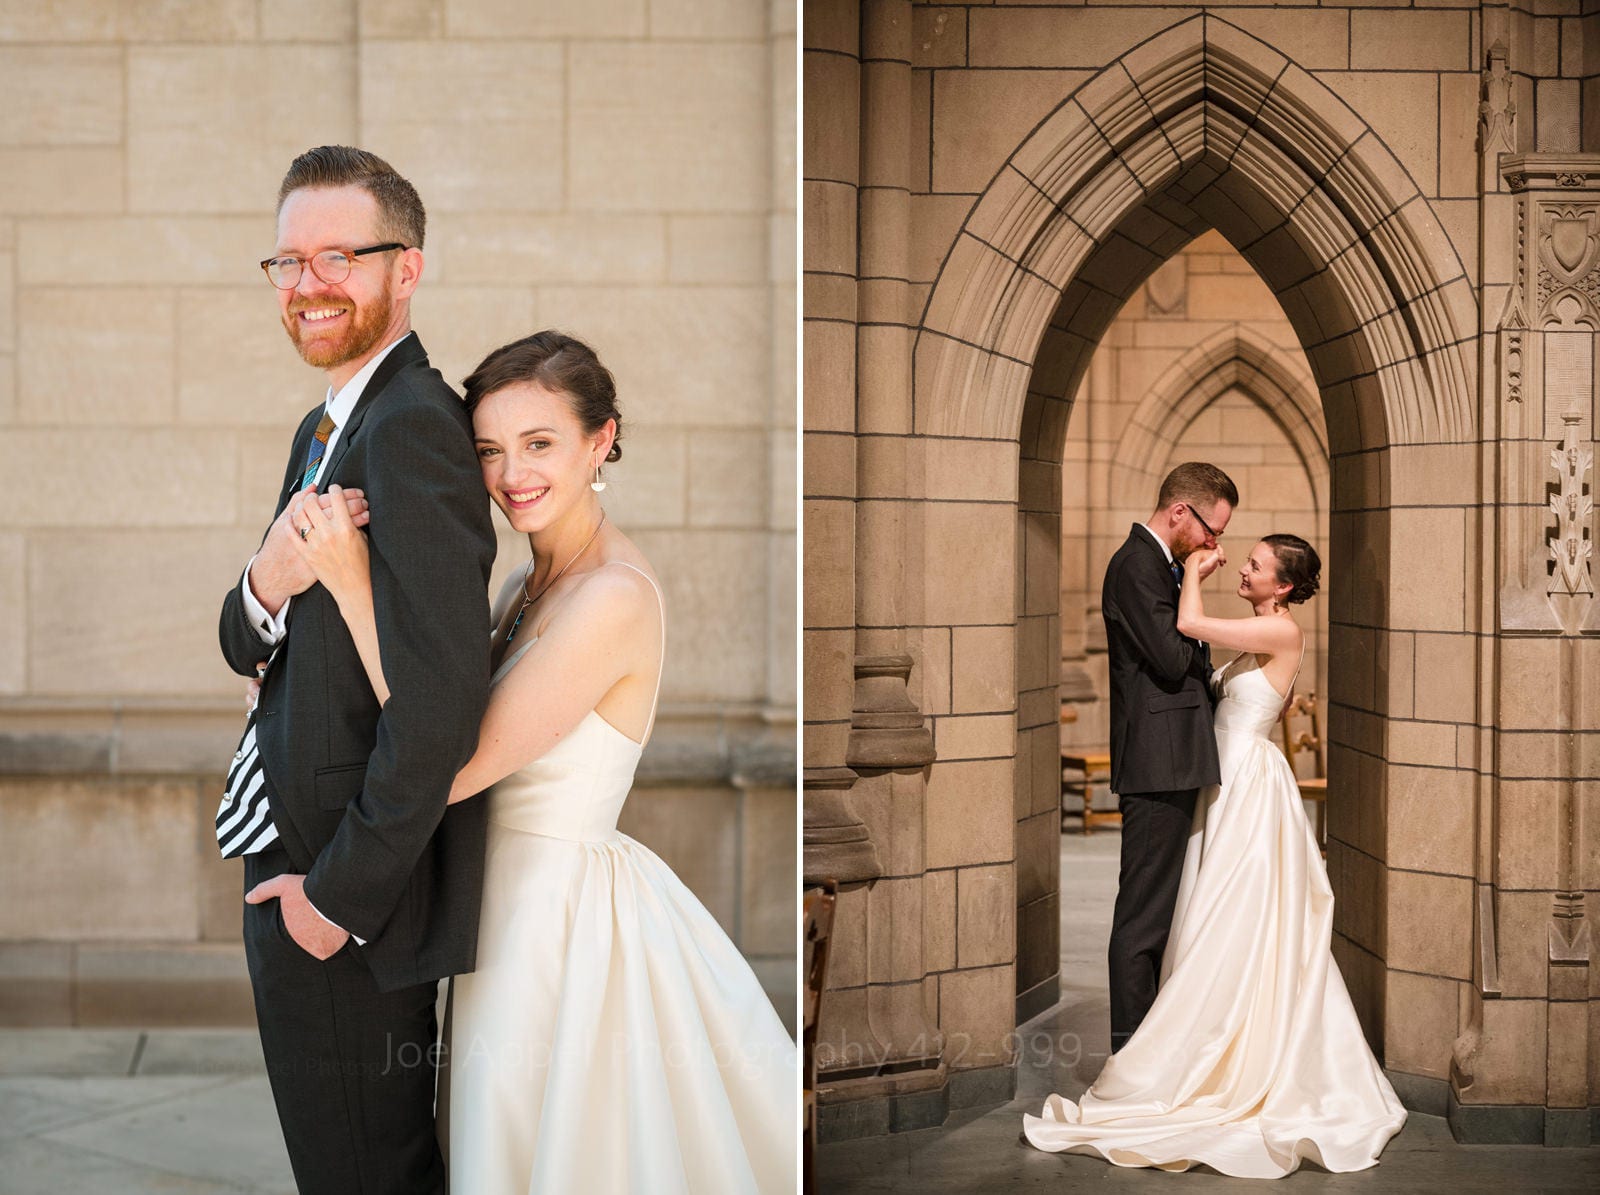 Bride and groom smile at the camera as the bride holds the groom from behind. A groom kisses the hand of his bride as they stand beneath an arch in the interior of the Cathedral of Learning at the University of Pittsburgh.